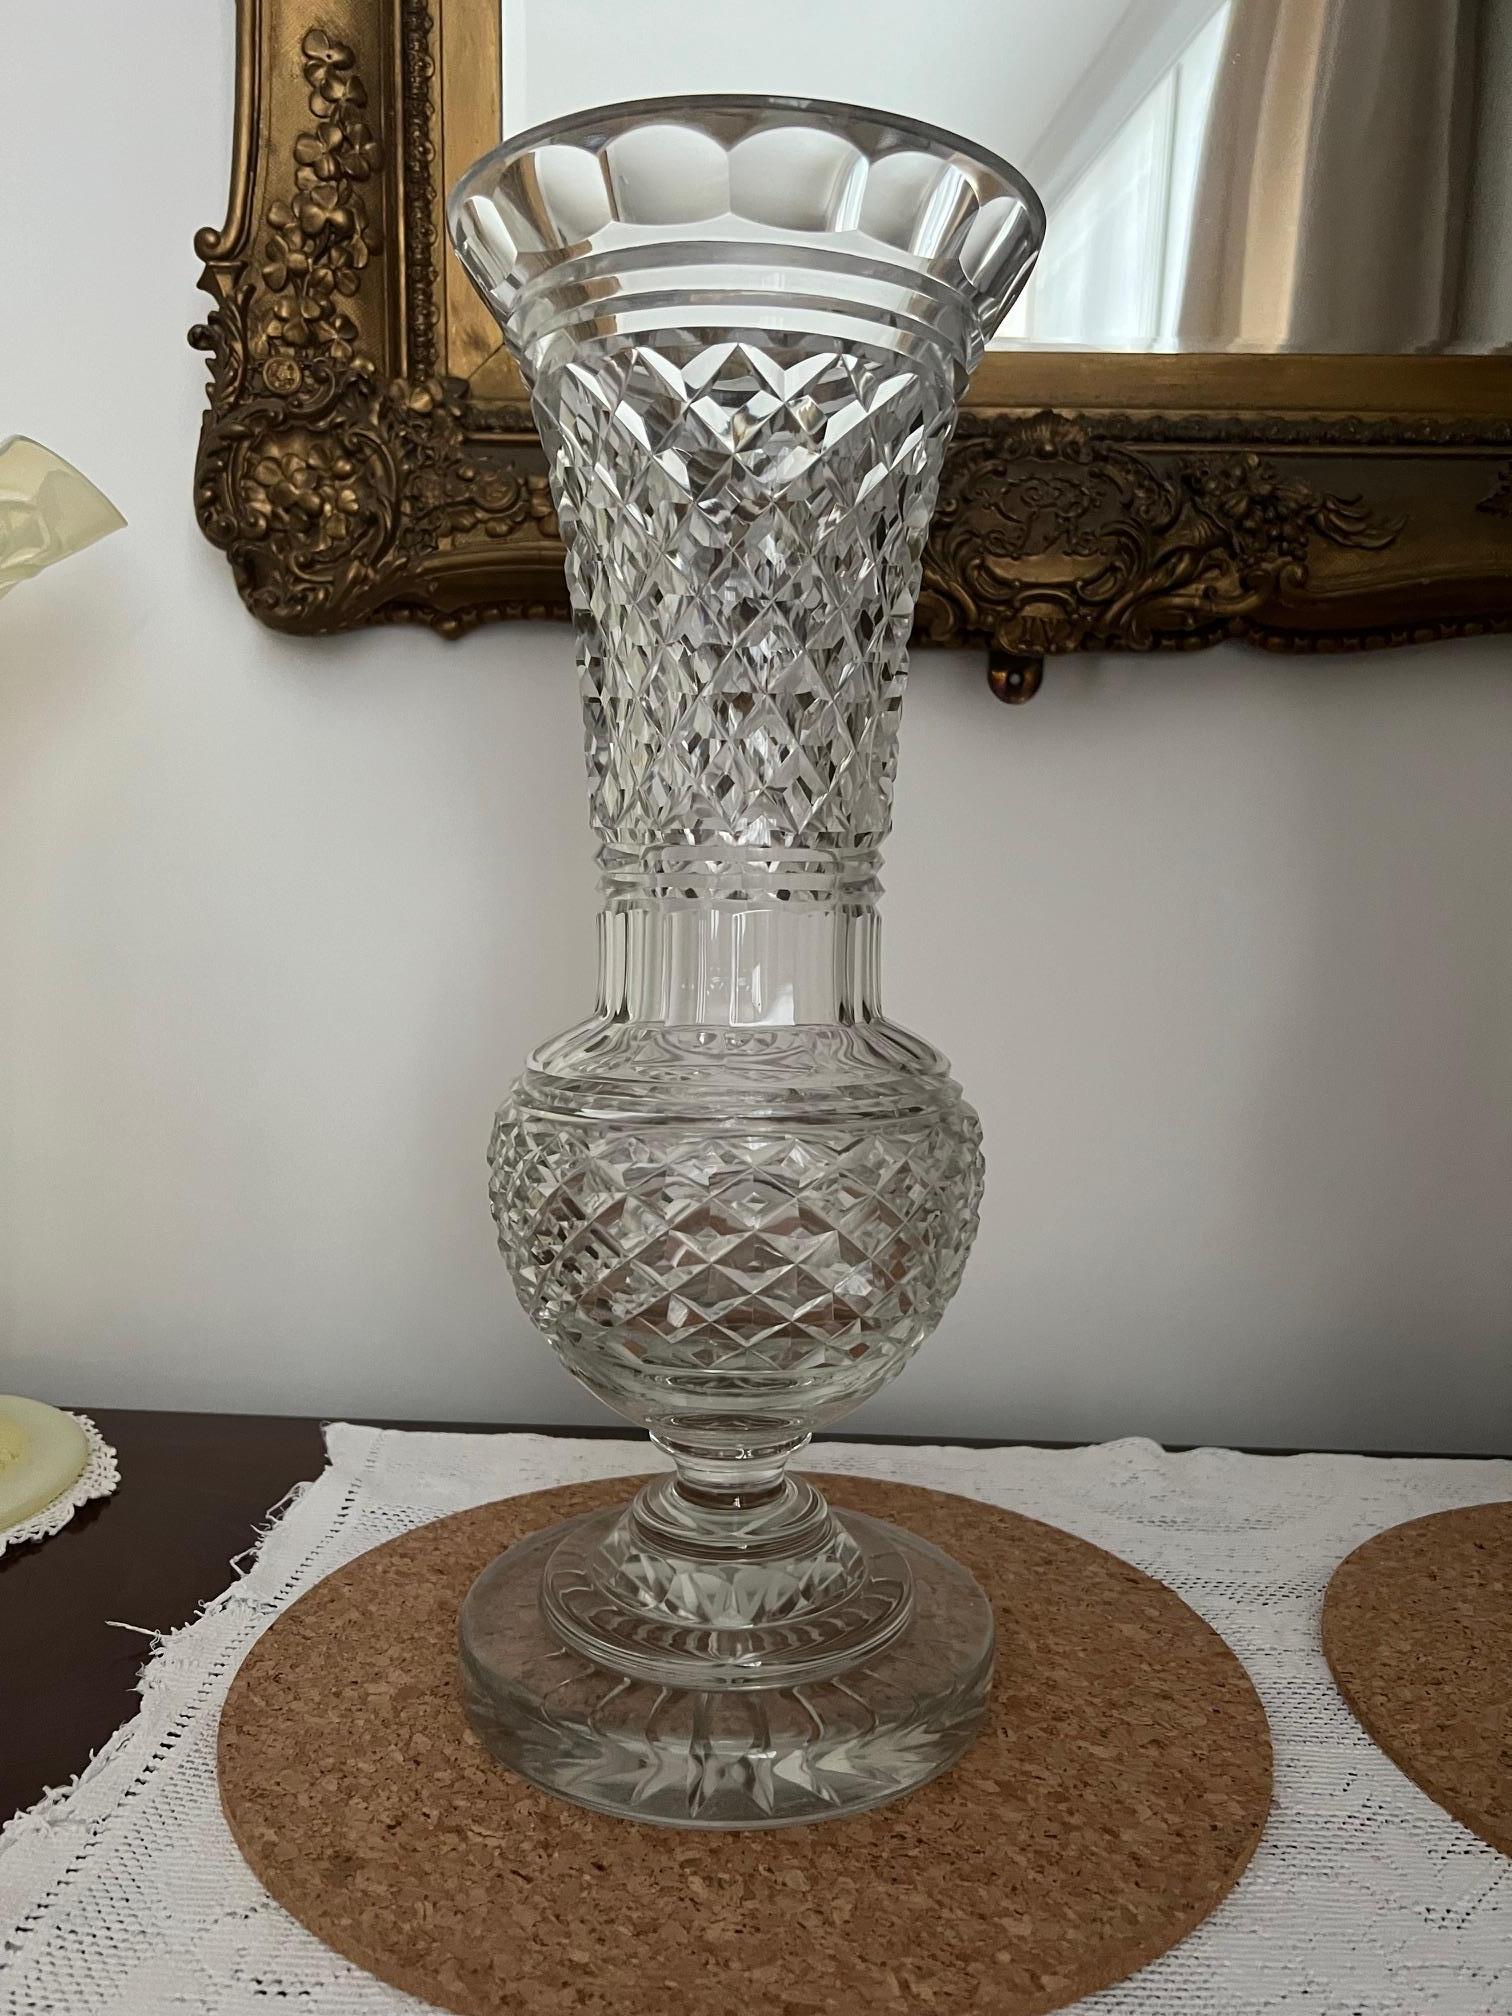 Very nice pair of hand blown and wheel cut vases.

Very noticable transparency, clear white glass - no yellowing.

Very good condition. No chips or cracks. Bases show signs of use consistent with age (light markings).



